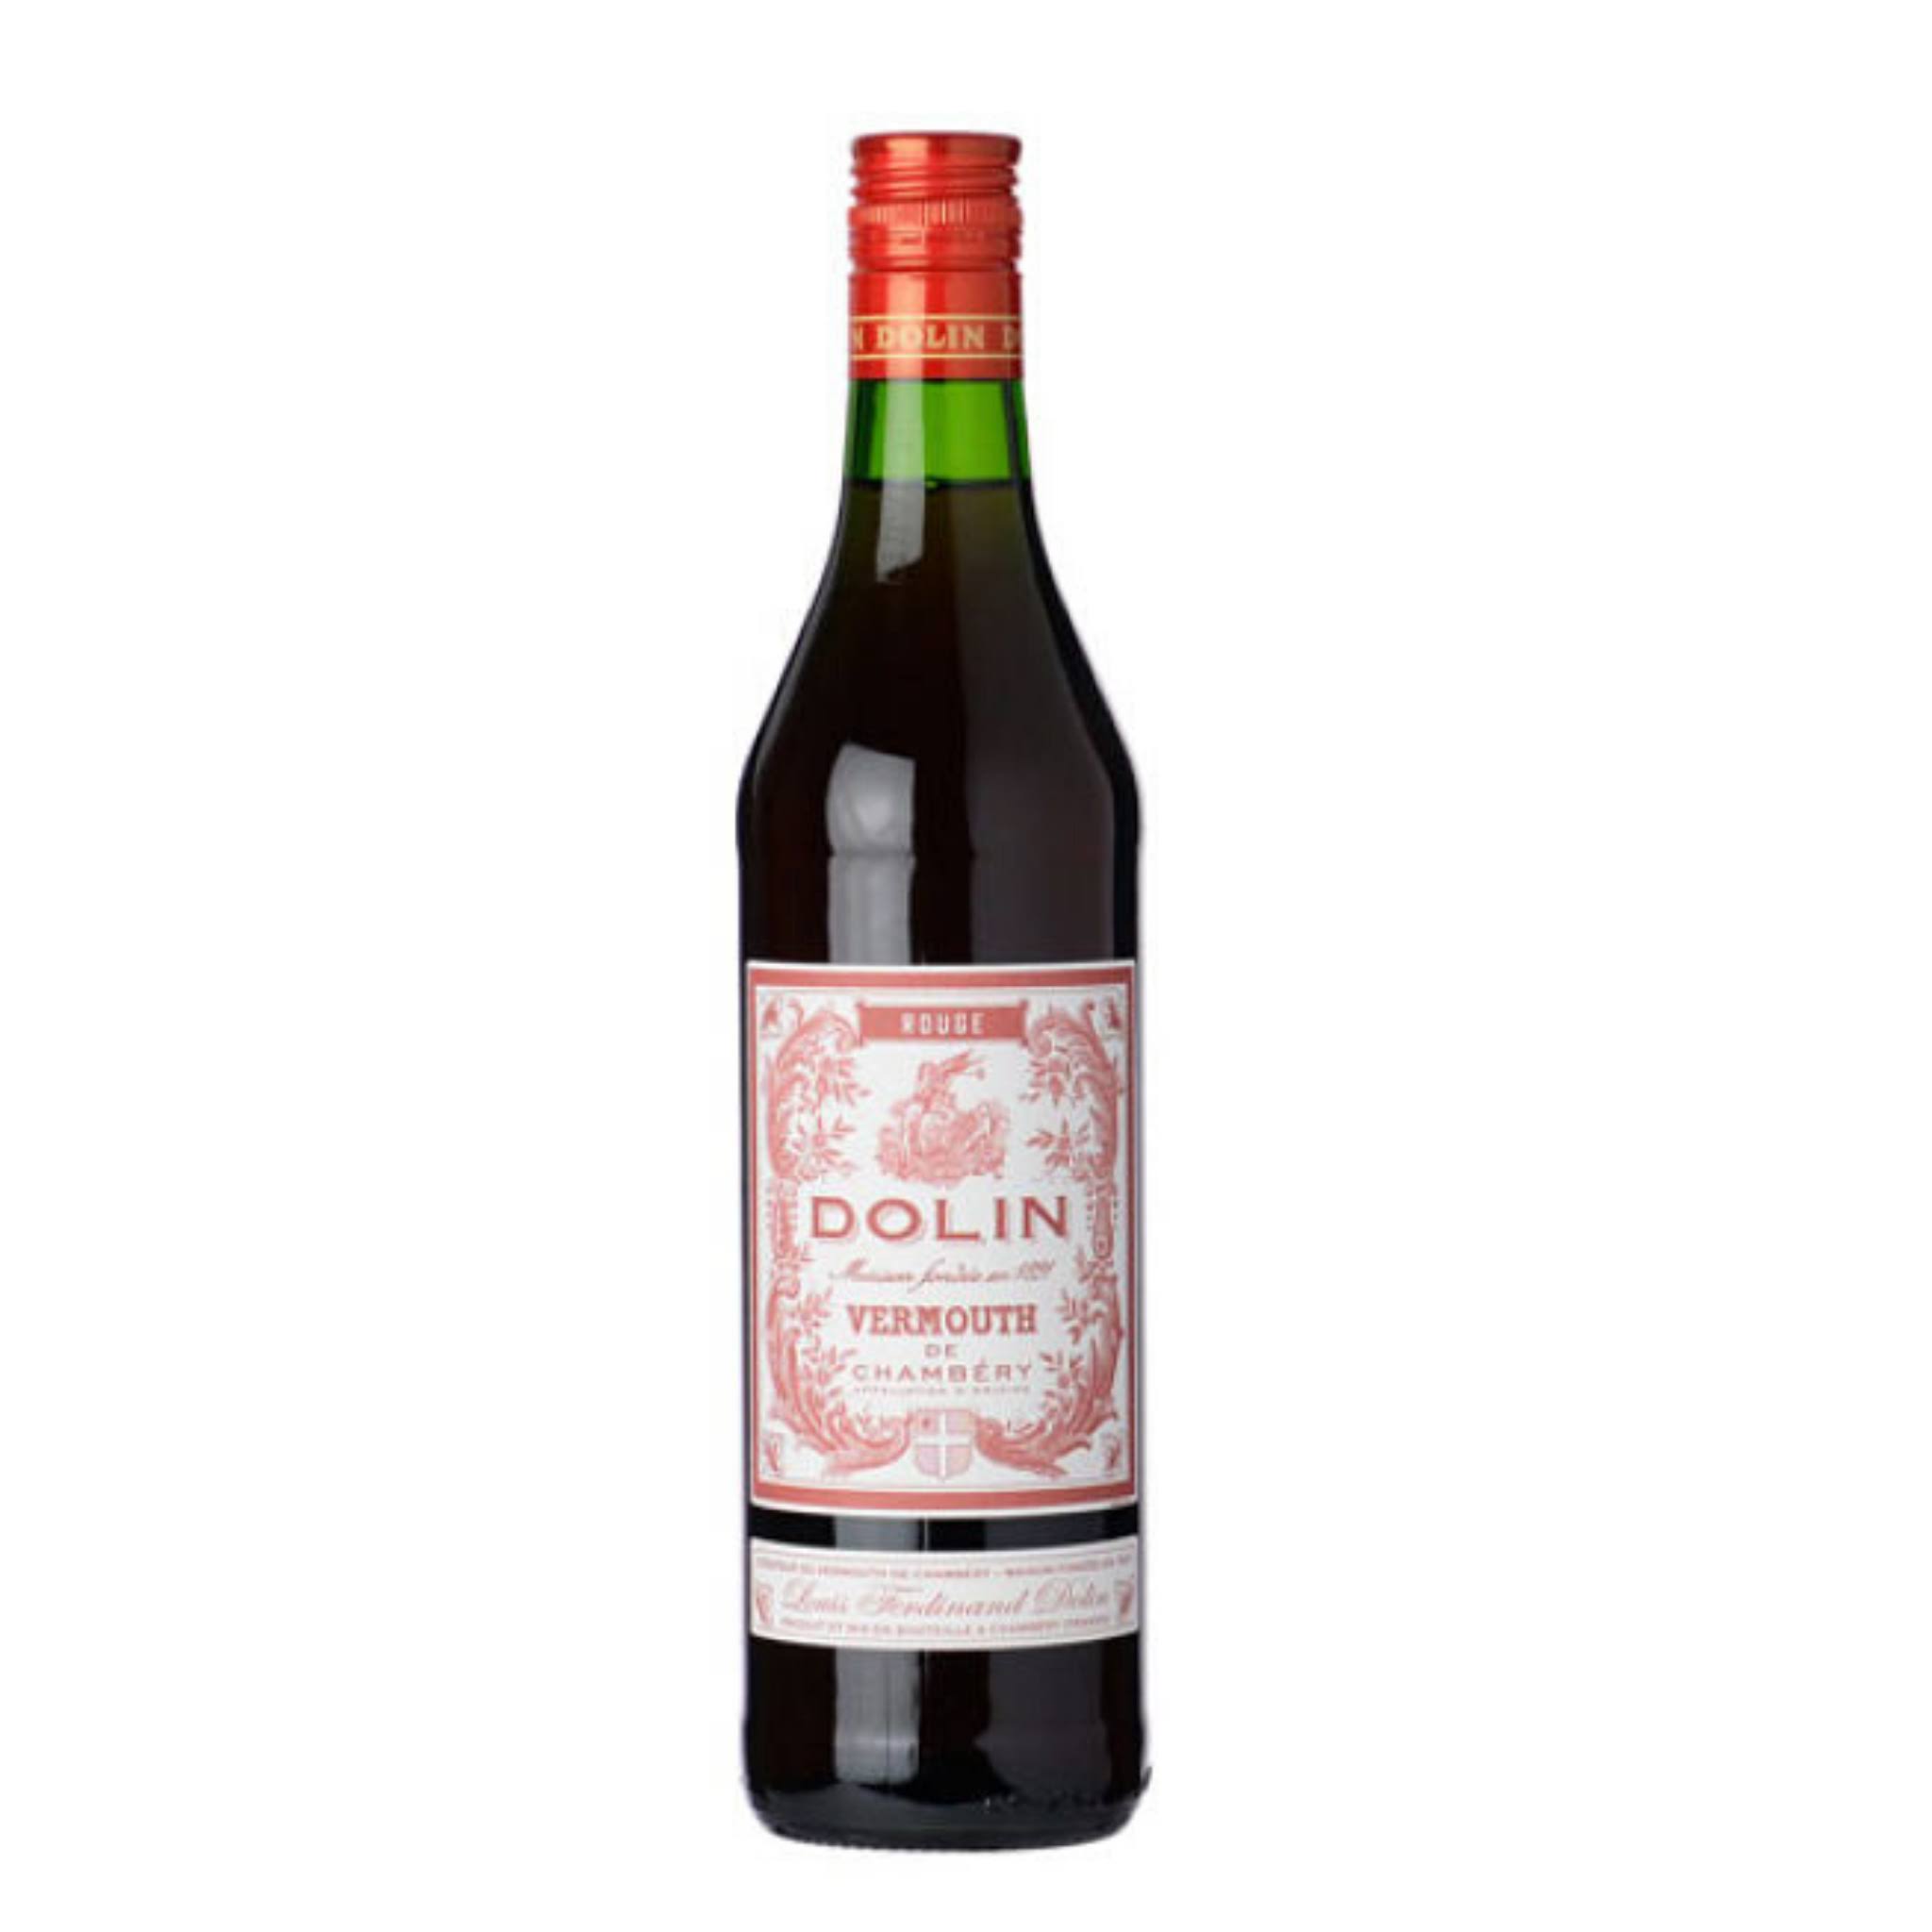 Dolin Rouge Vermouth de Chambery 375ml Bottle